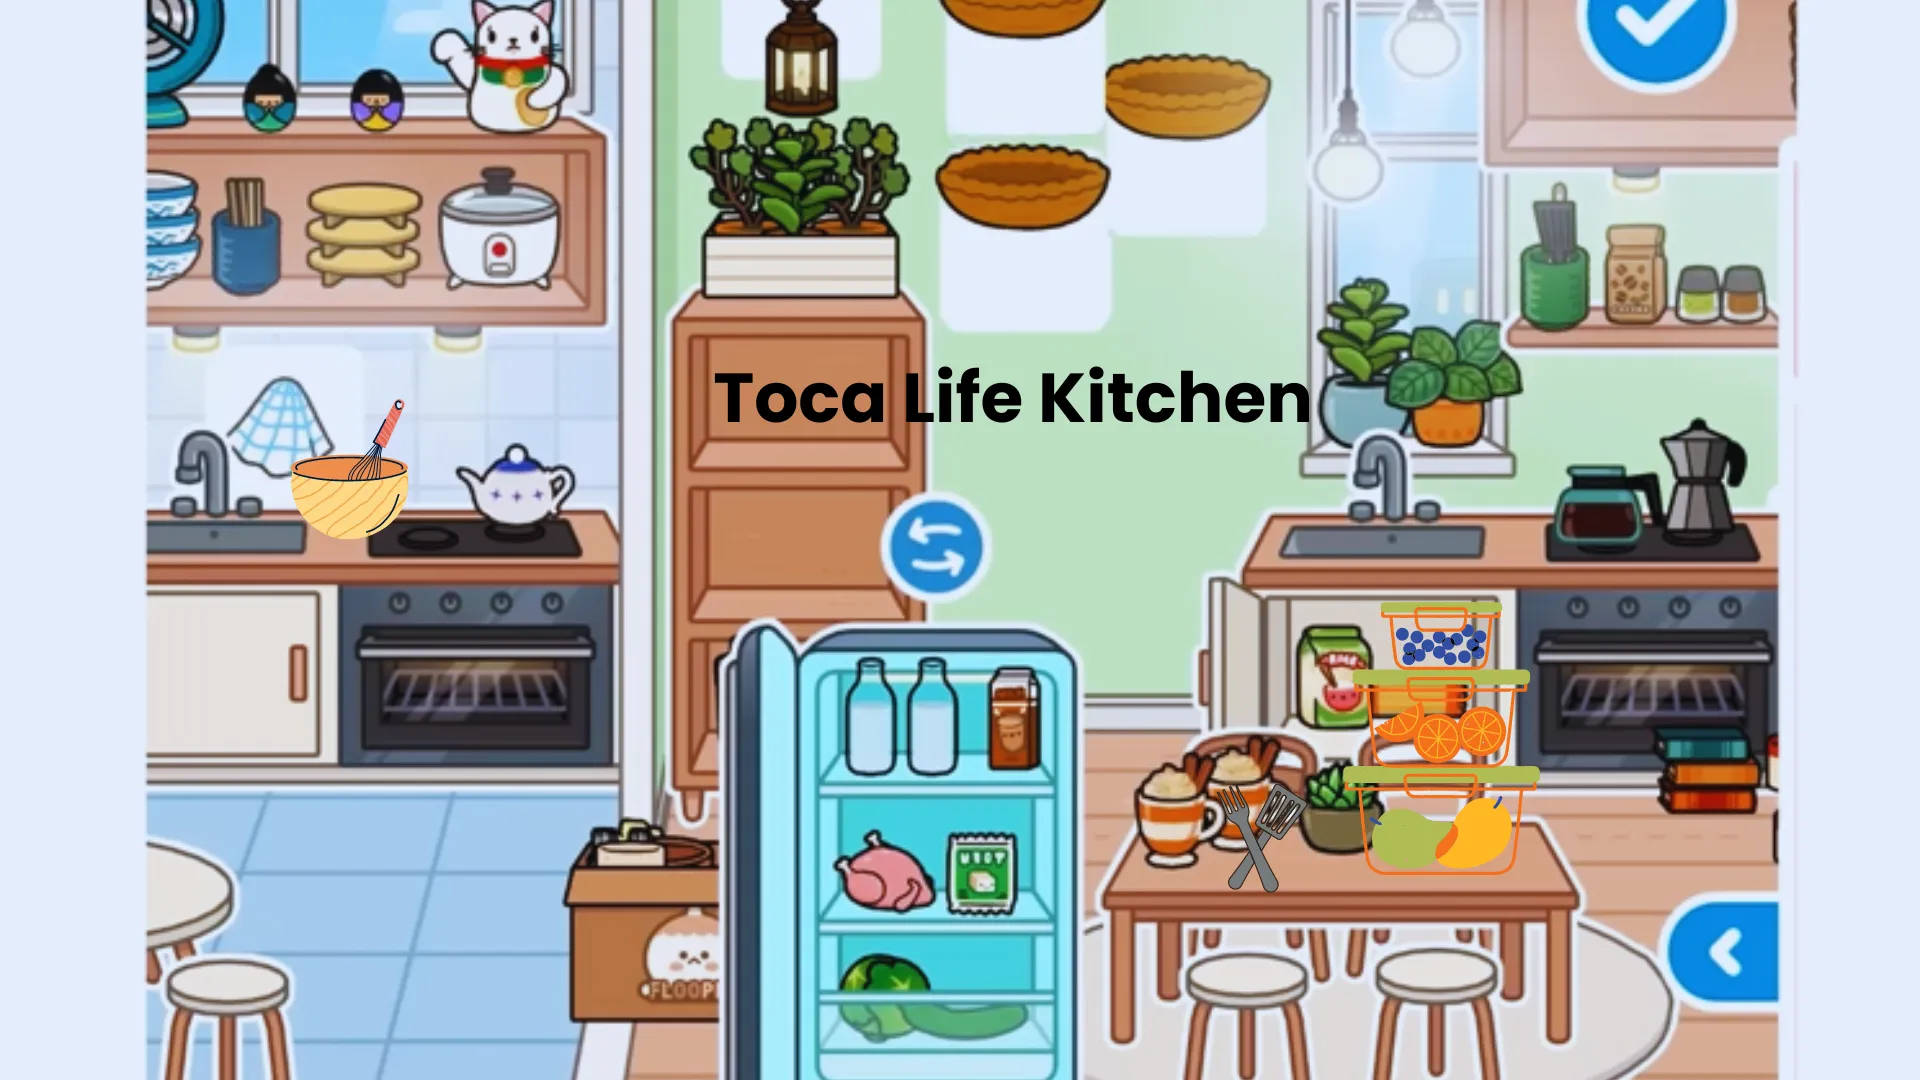 Create delicious dishes in Toca Life Kitchen.